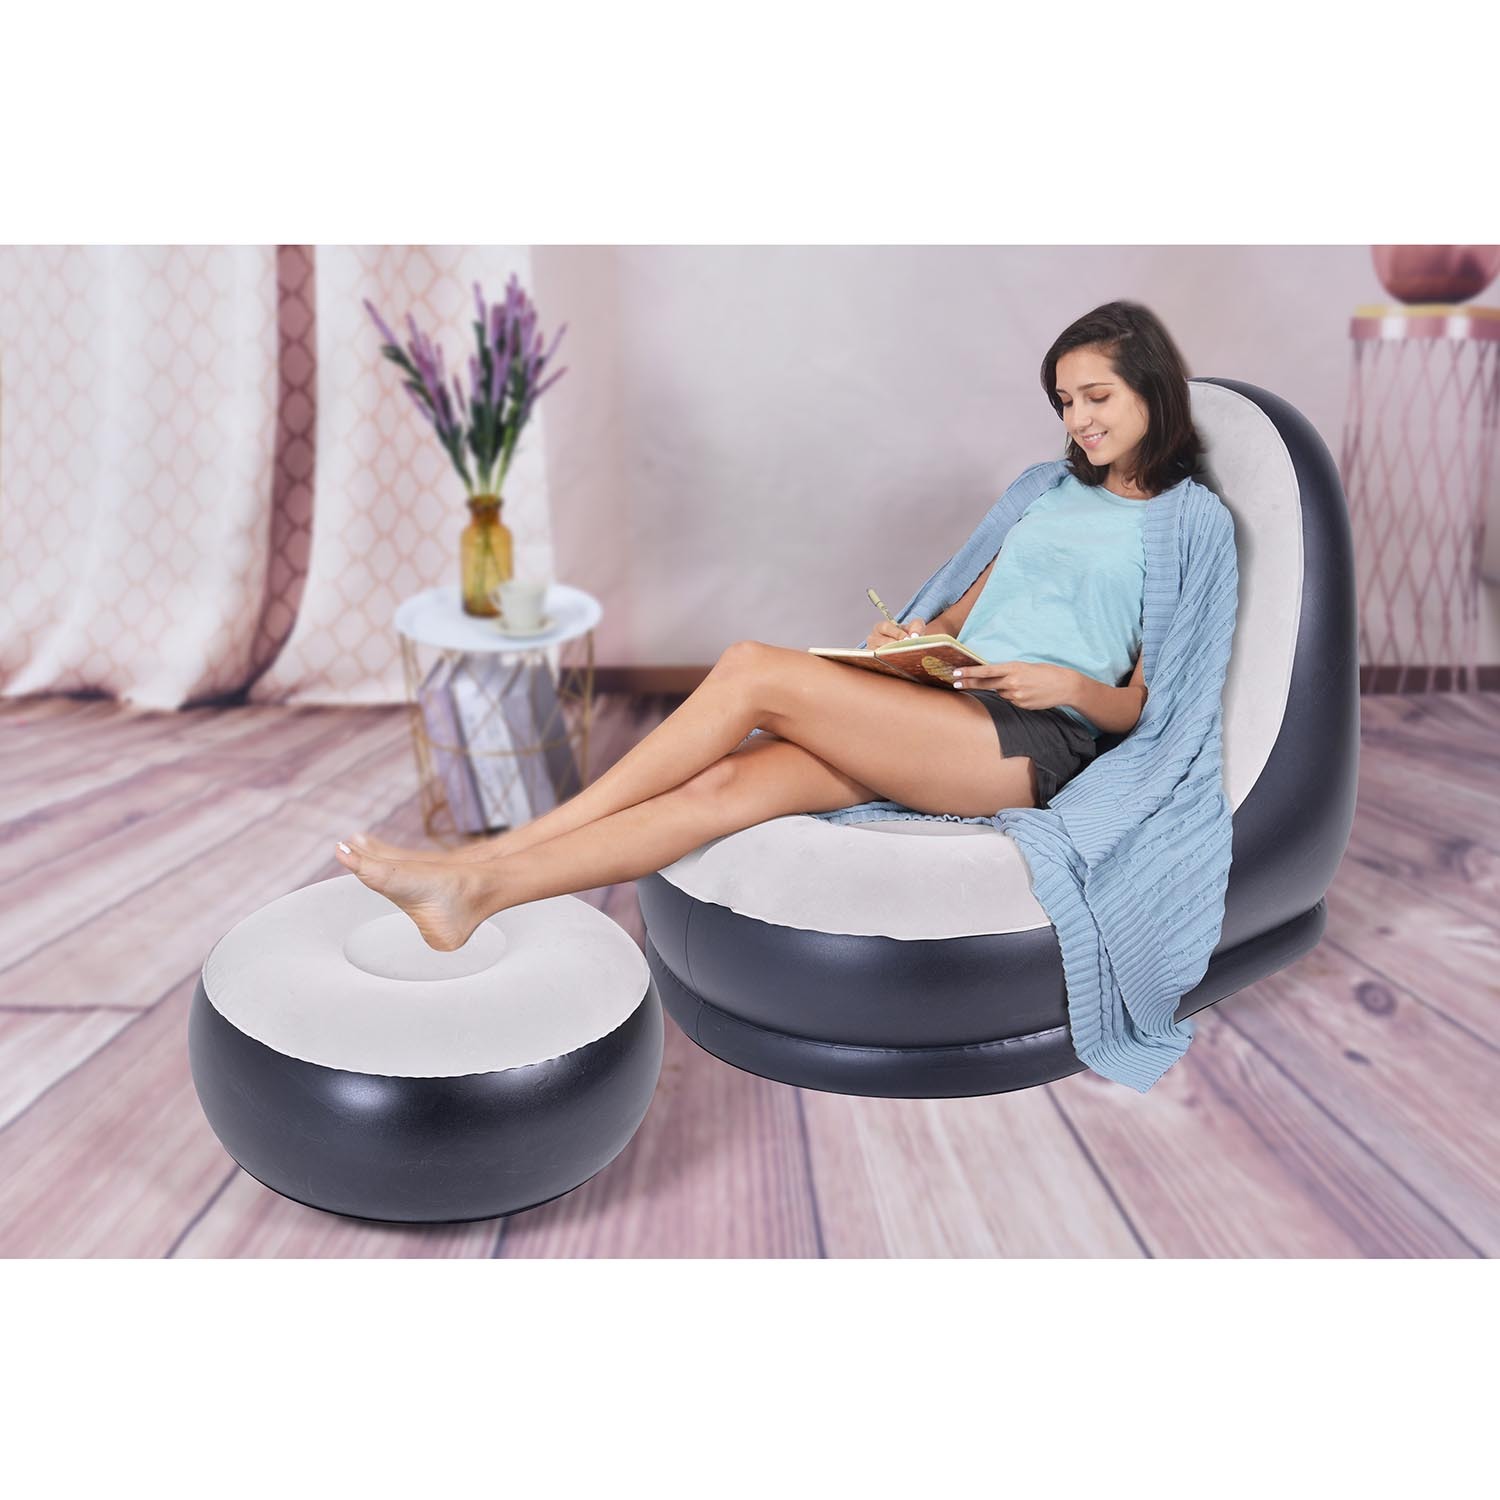 Avenli Black and White Inflatable Vinyl Lounger with Stool Image 3